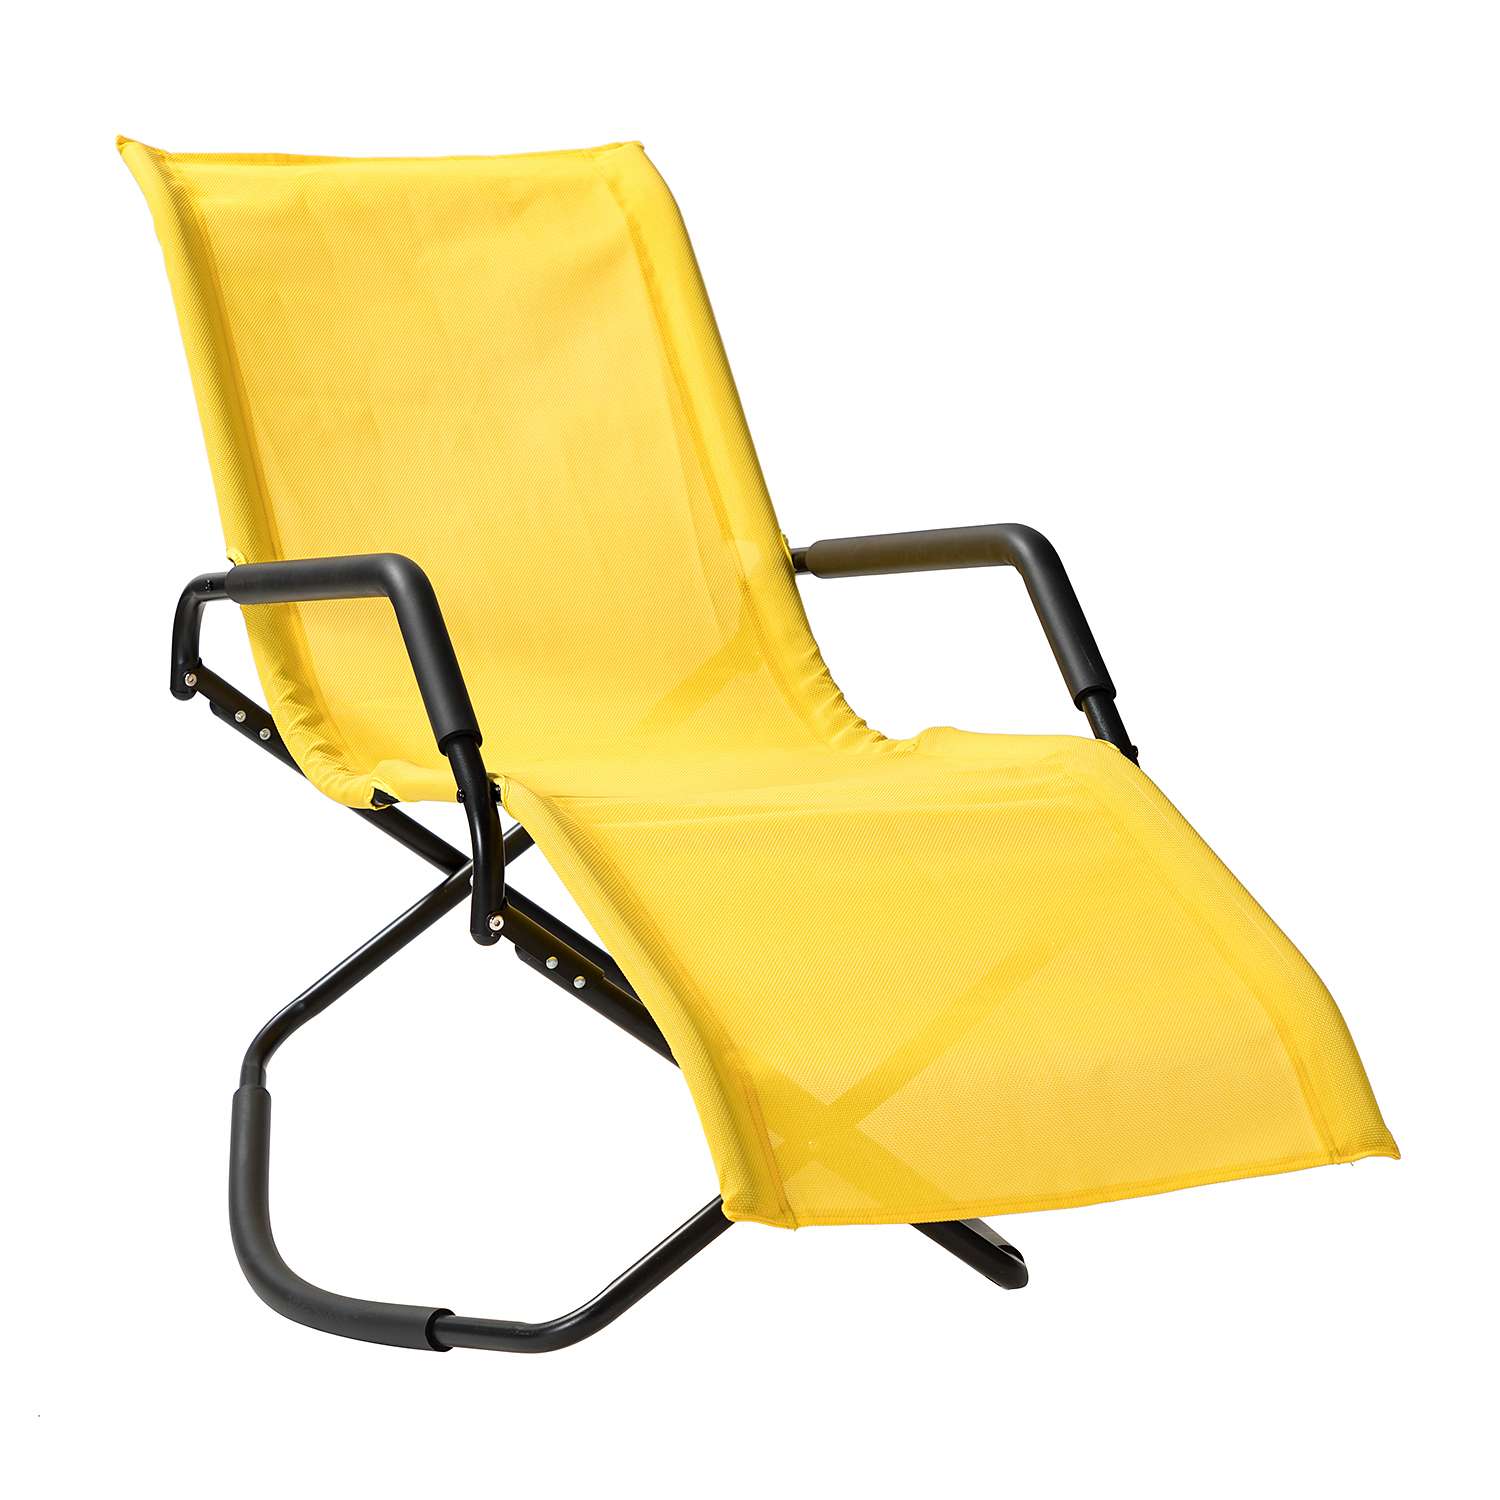 Folding Lounge Chair, Patio Rocking Chaise Chair with Armrests, Beach Lightweight Reclining Chair, Outdoor Portable Folding Chair, Lounge Chaise Chair for Camping, Pool, Lawn, Garden, D7837 - image 2 of 9